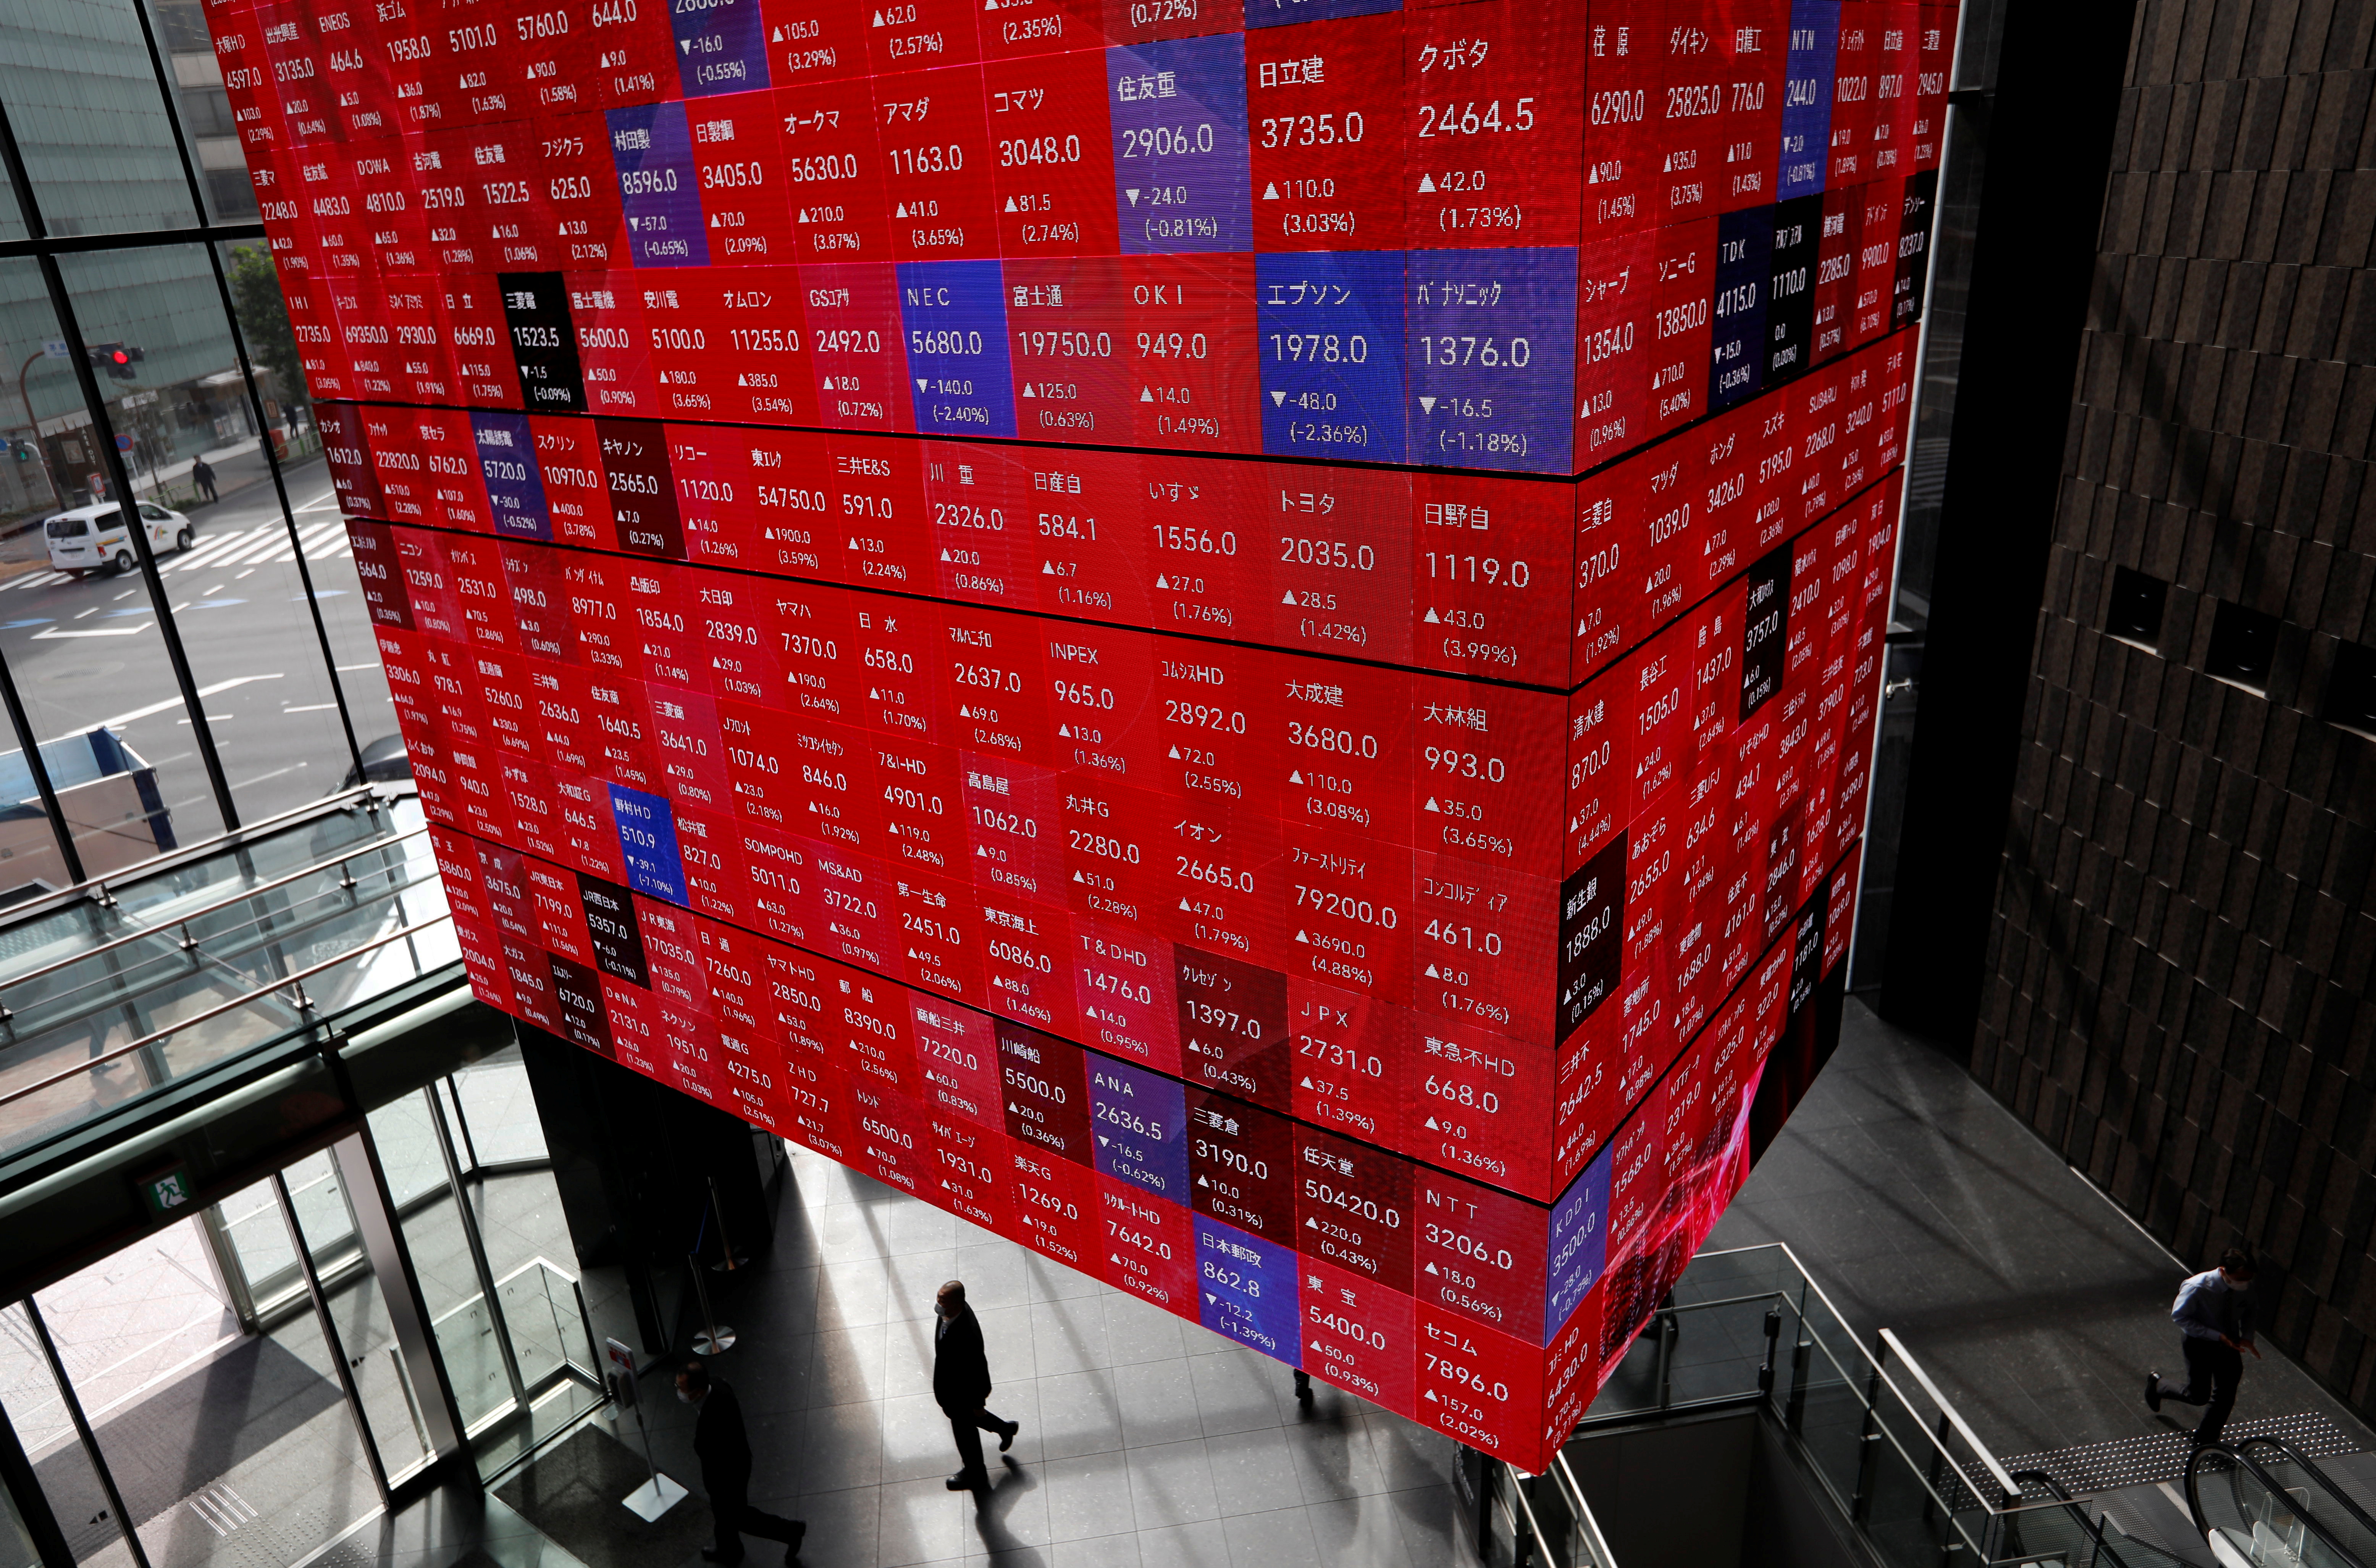 An electronic stock quotation board is displayed inside a conference hall in Tokyo, Japan November 1, 2021. REUTERS/Issei Kato